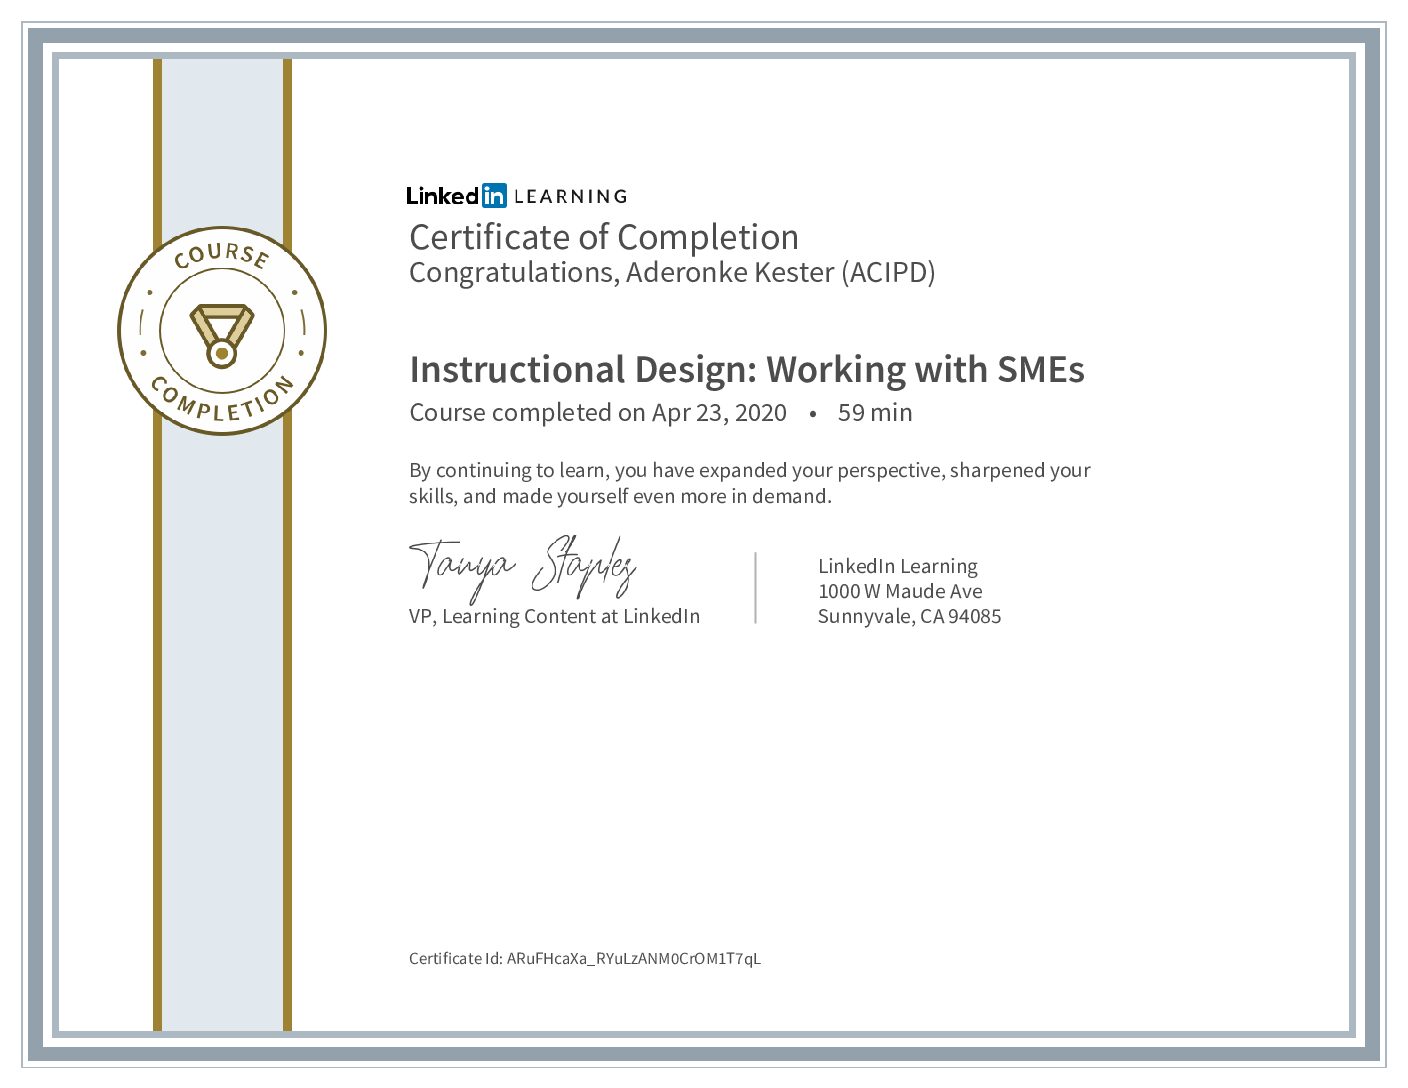 CertificateOfCompletion_Instructional Design_ Working with SMEs